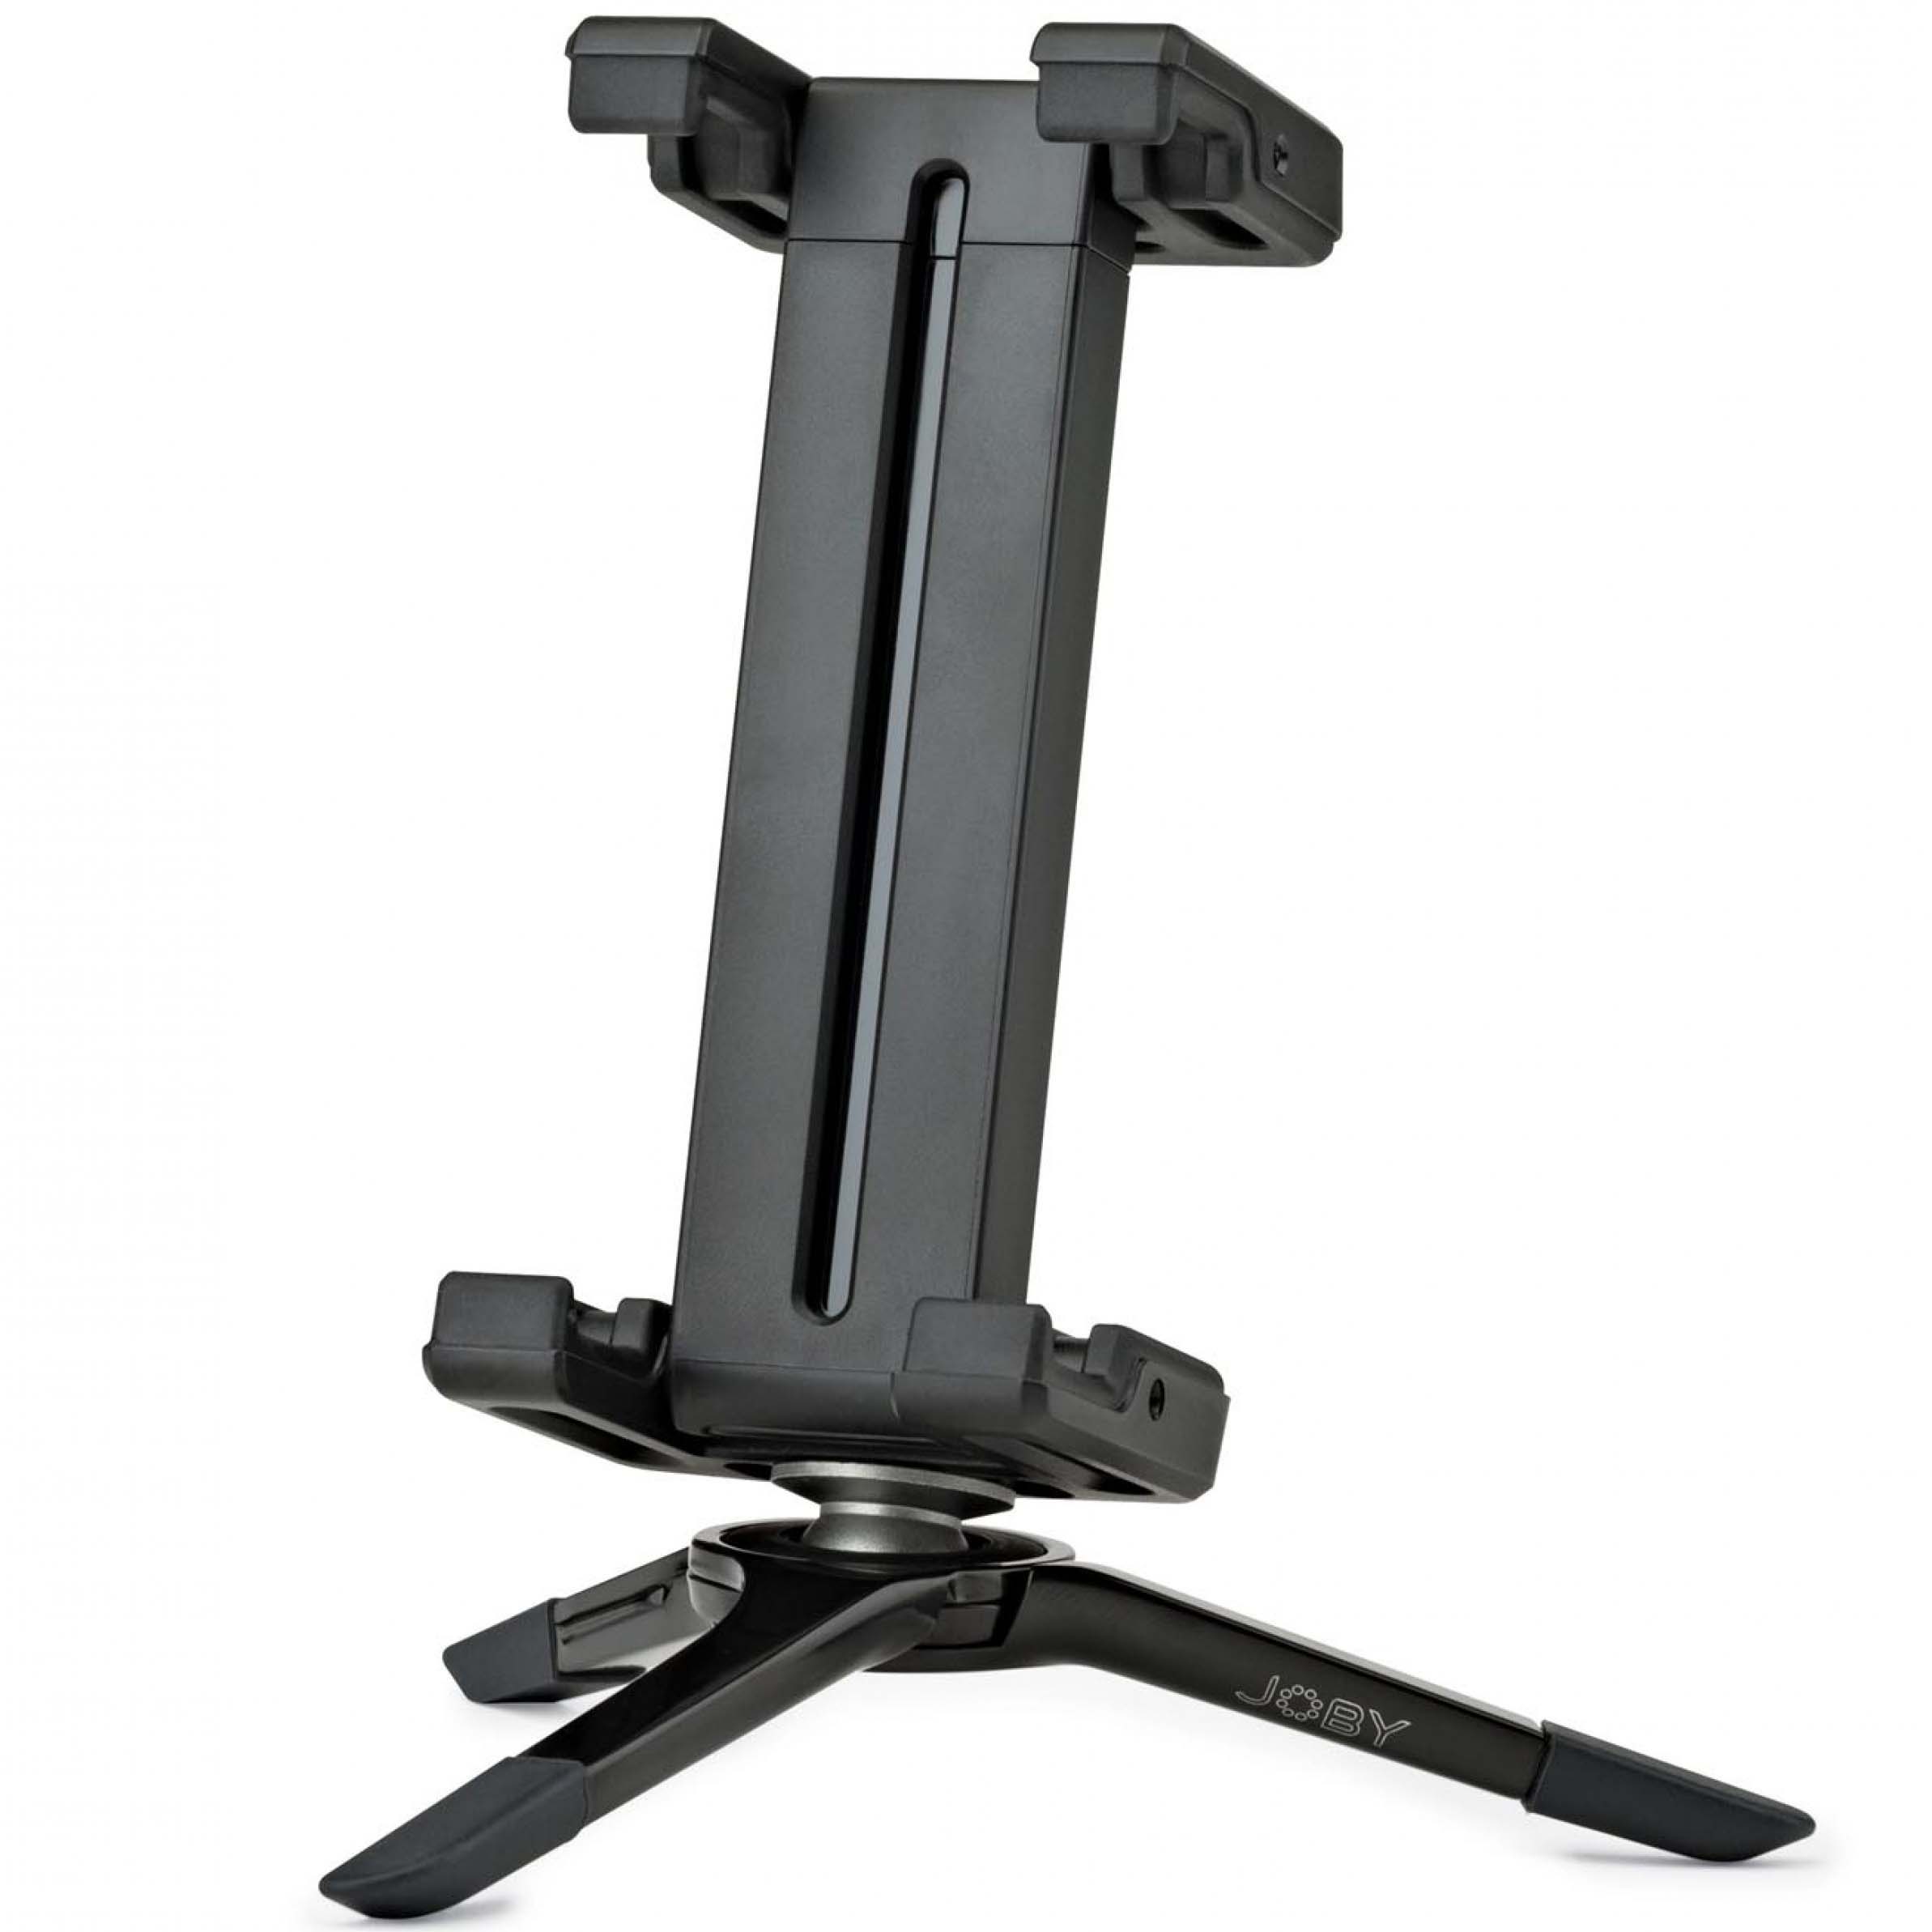 SOPORTE JOBY GRIPTIGHT MICRO STAND FOR SMALLER TABLES + PIE